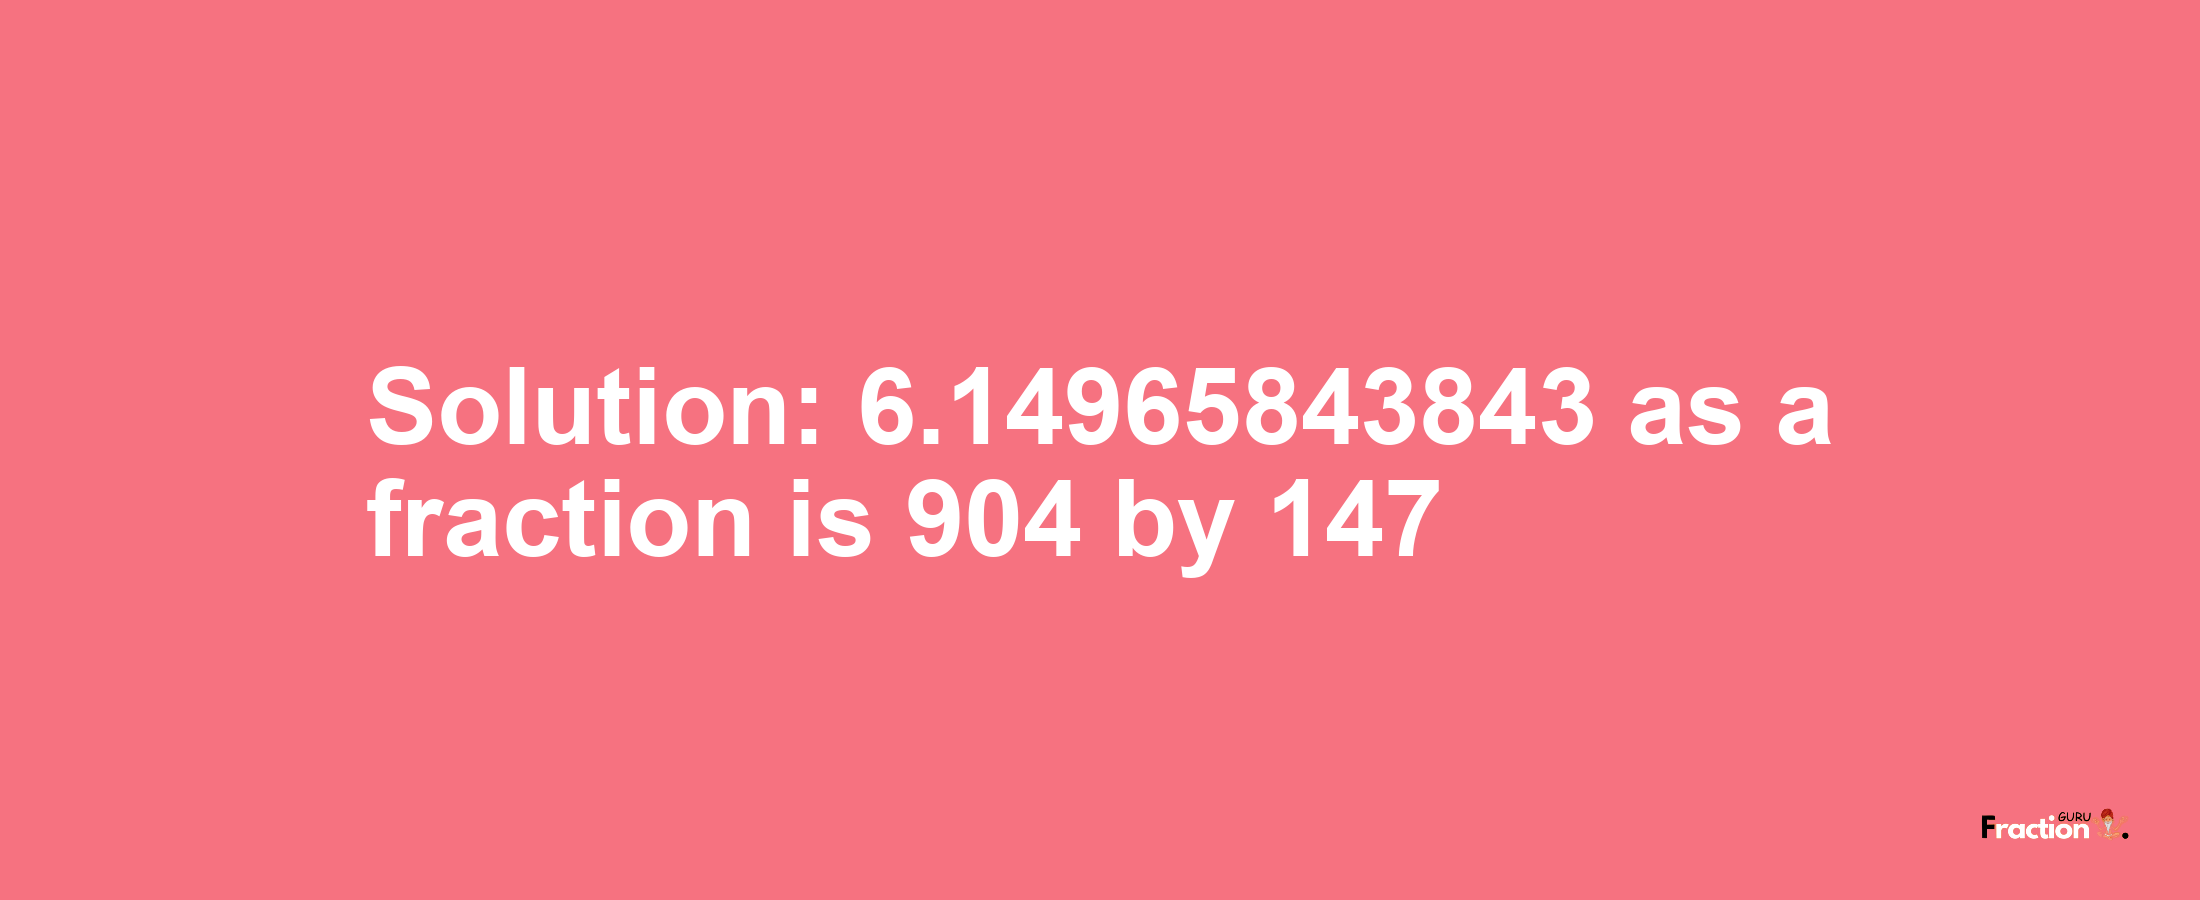 Solution:6.14965843843 as a fraction is 904/147